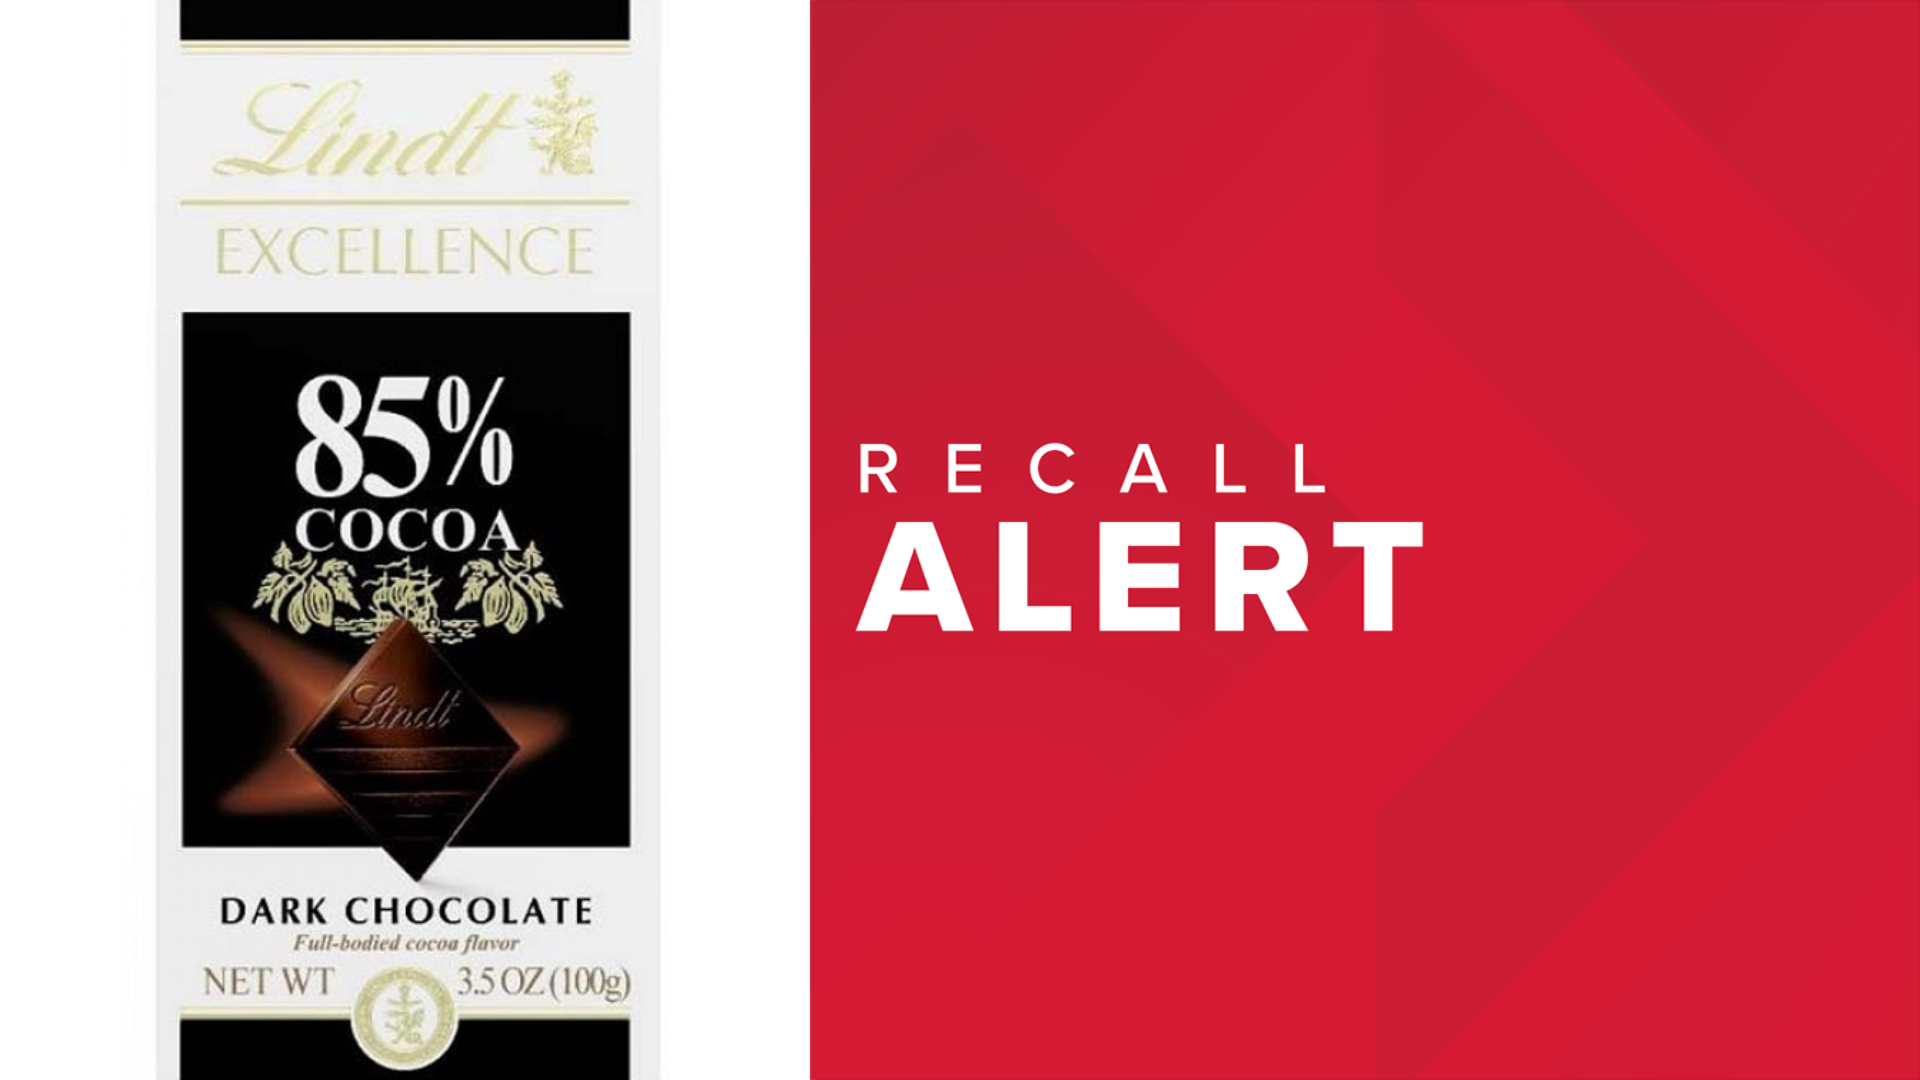 Lindt recalls dark chocolate bars due to wrong labeling, allergy